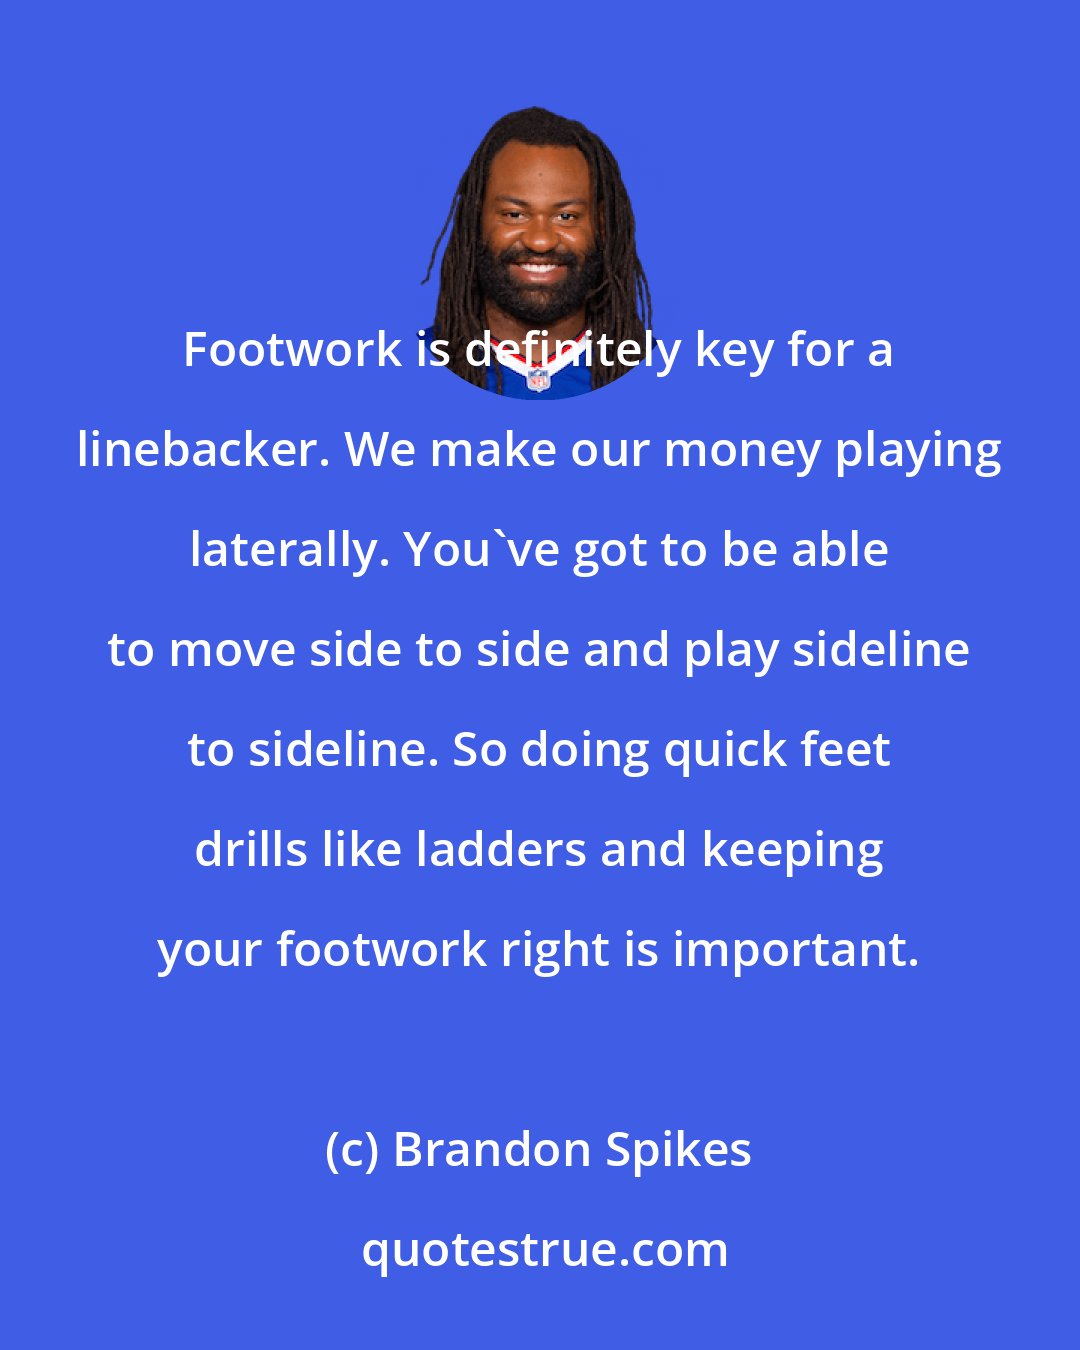 Brandon Spikes: Footwork is definitely key for a linebacker. We make our money playing laterally. You've got to be able to move side to side and play sideline to sideline. So doing quick feet drills like ladders and keeping your footwork right is important.